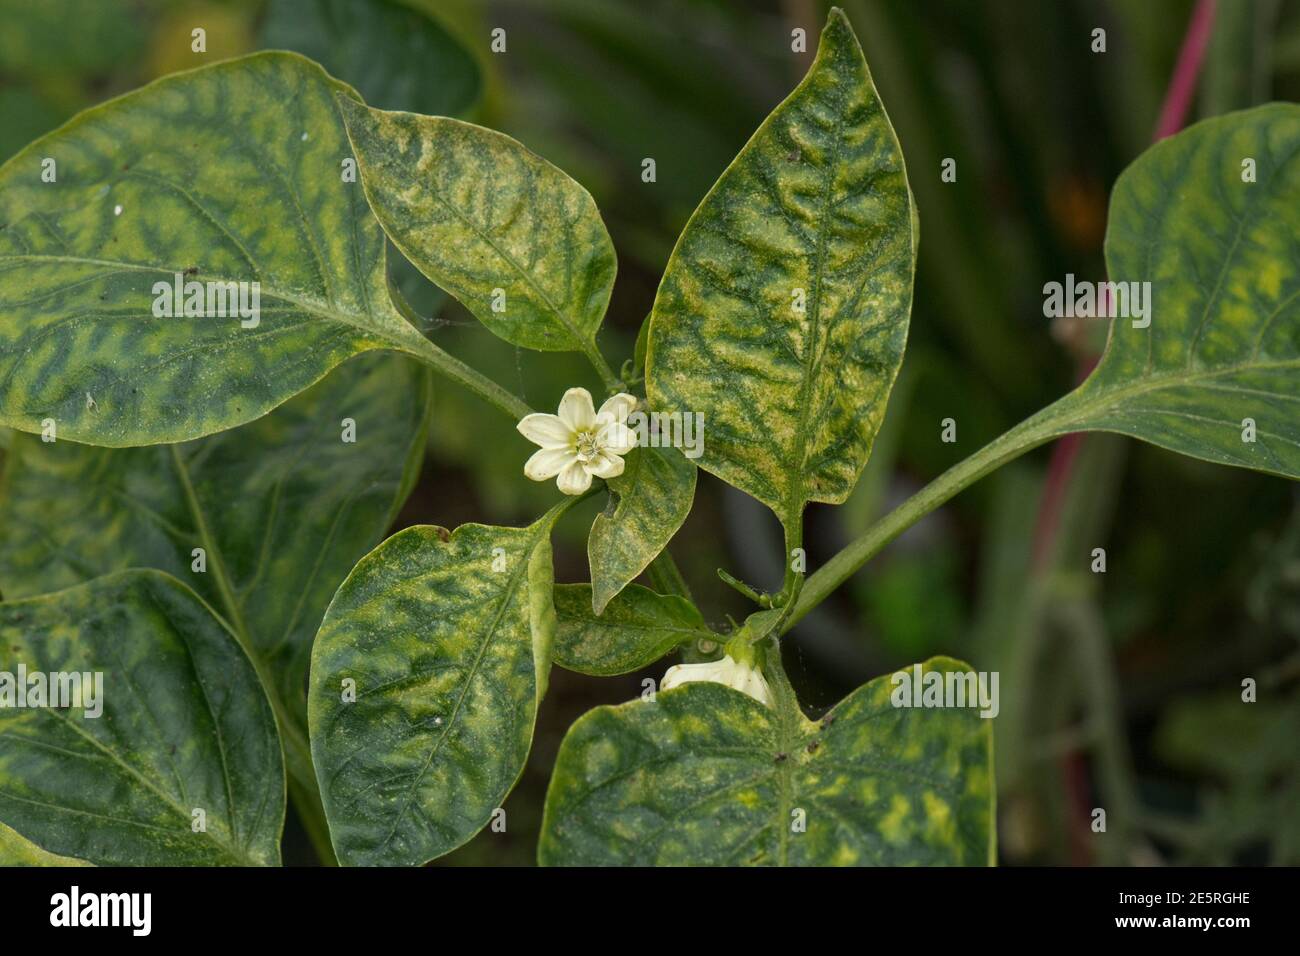 Two-spotted spider mite (Tetranychus urticae) damage to Capsicum pepper leaves in a garden greenhouse, Berkshire, August Stock Photo